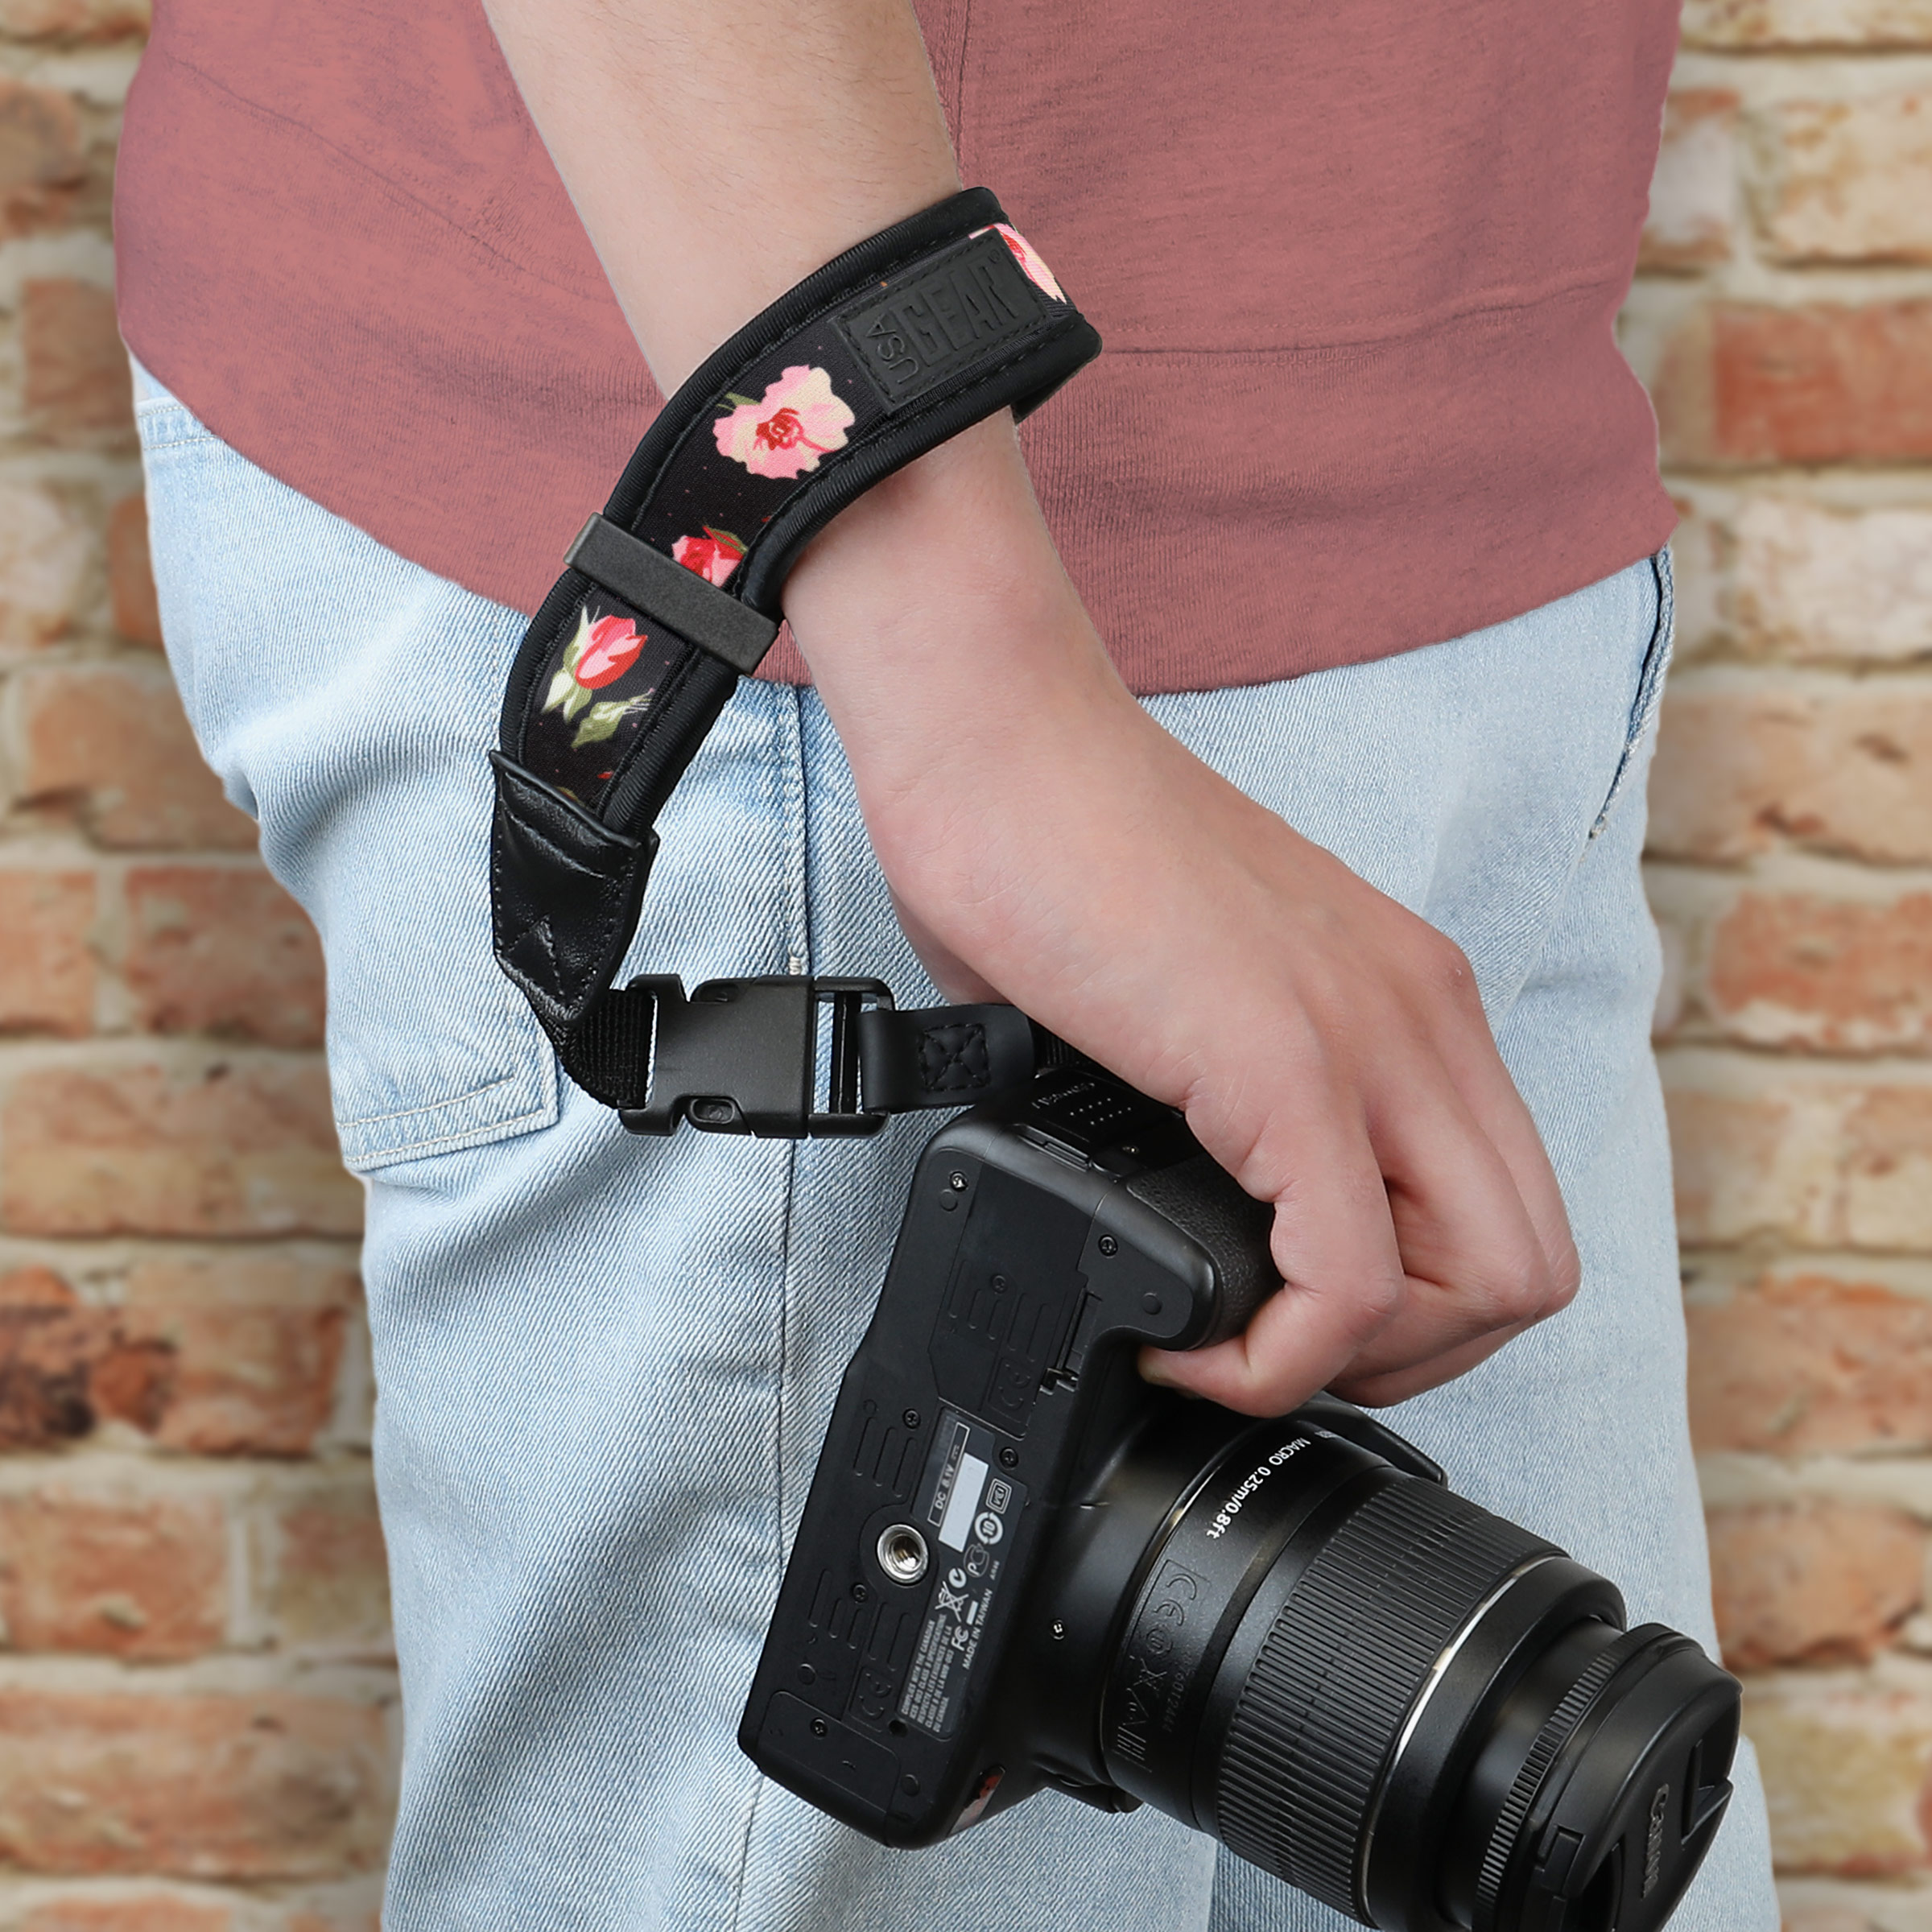 USA Gear Digital Camera Wrist Strap with Padded Neoprene Design and Quick Release Buckle System - image 5 of 9